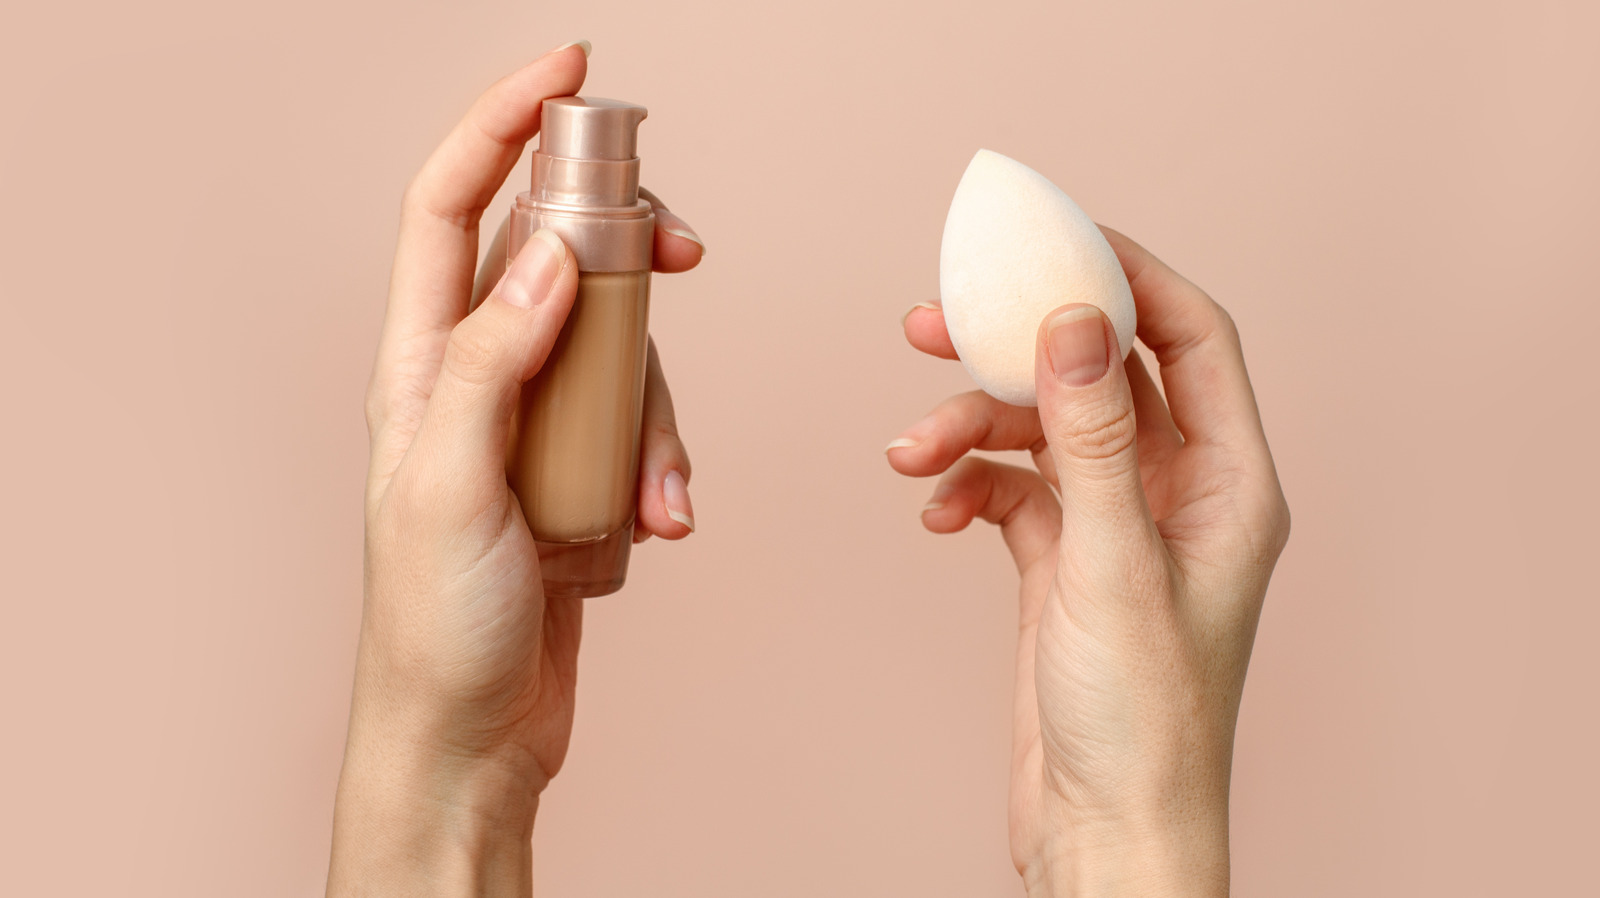 Foundation Mistakes You've Probably Been Guilty Of